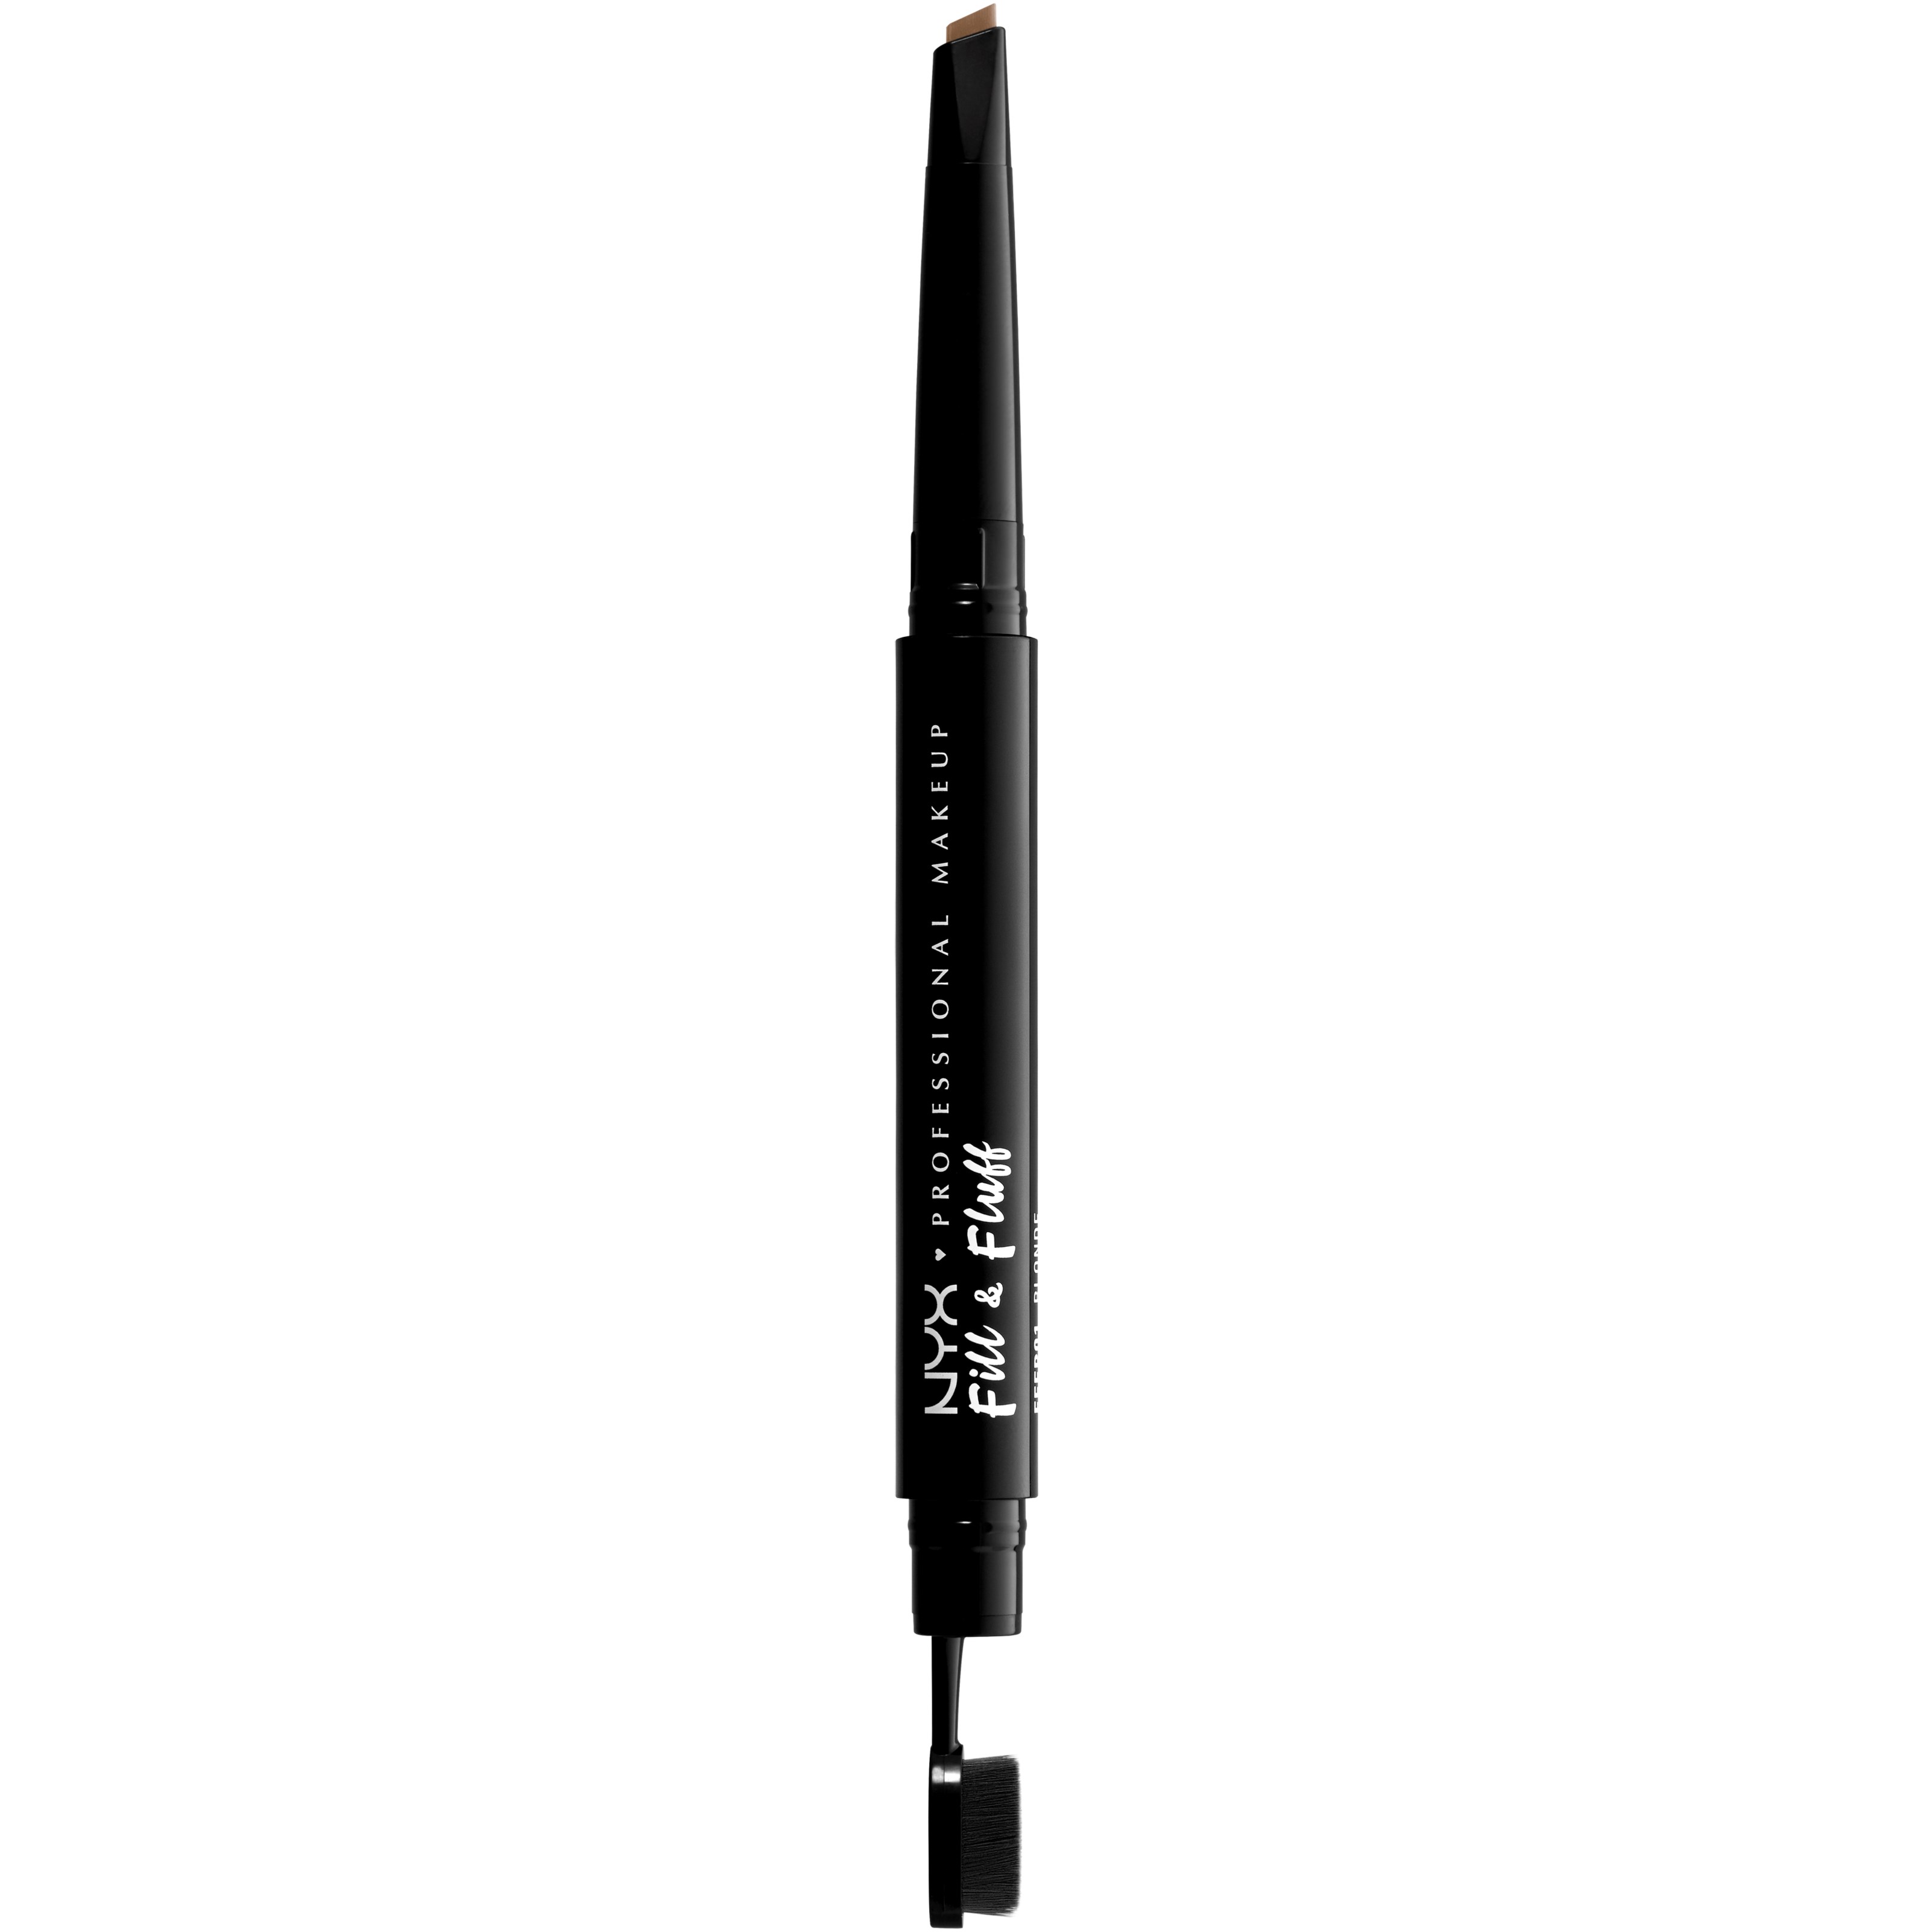 NYX PROFESSIONAL MAKEUP Fill & Fluff Eyebrow Pomade Pencil Taupe